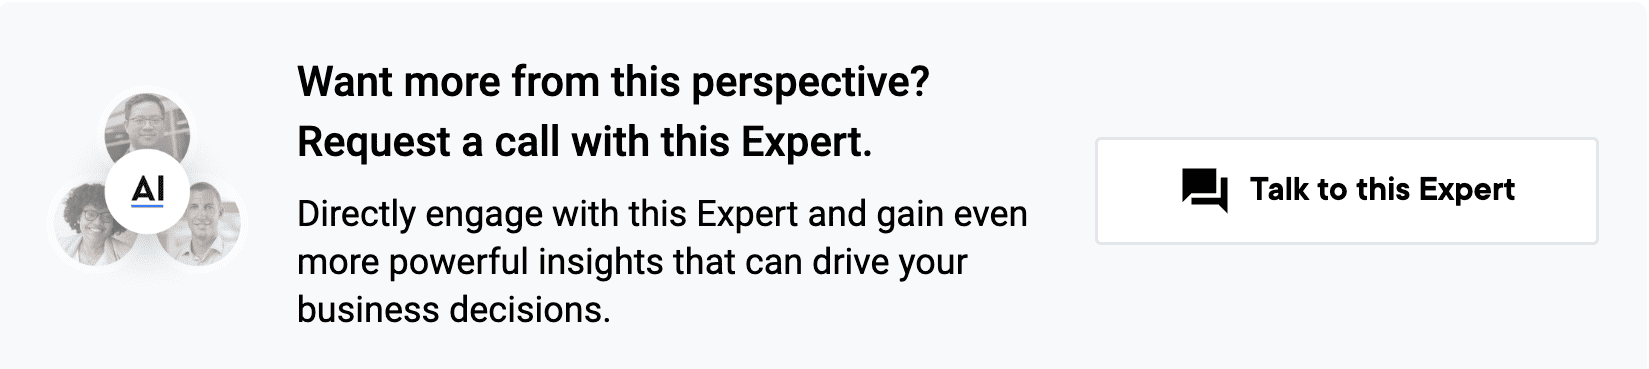 talk to this expert personalized expert calls